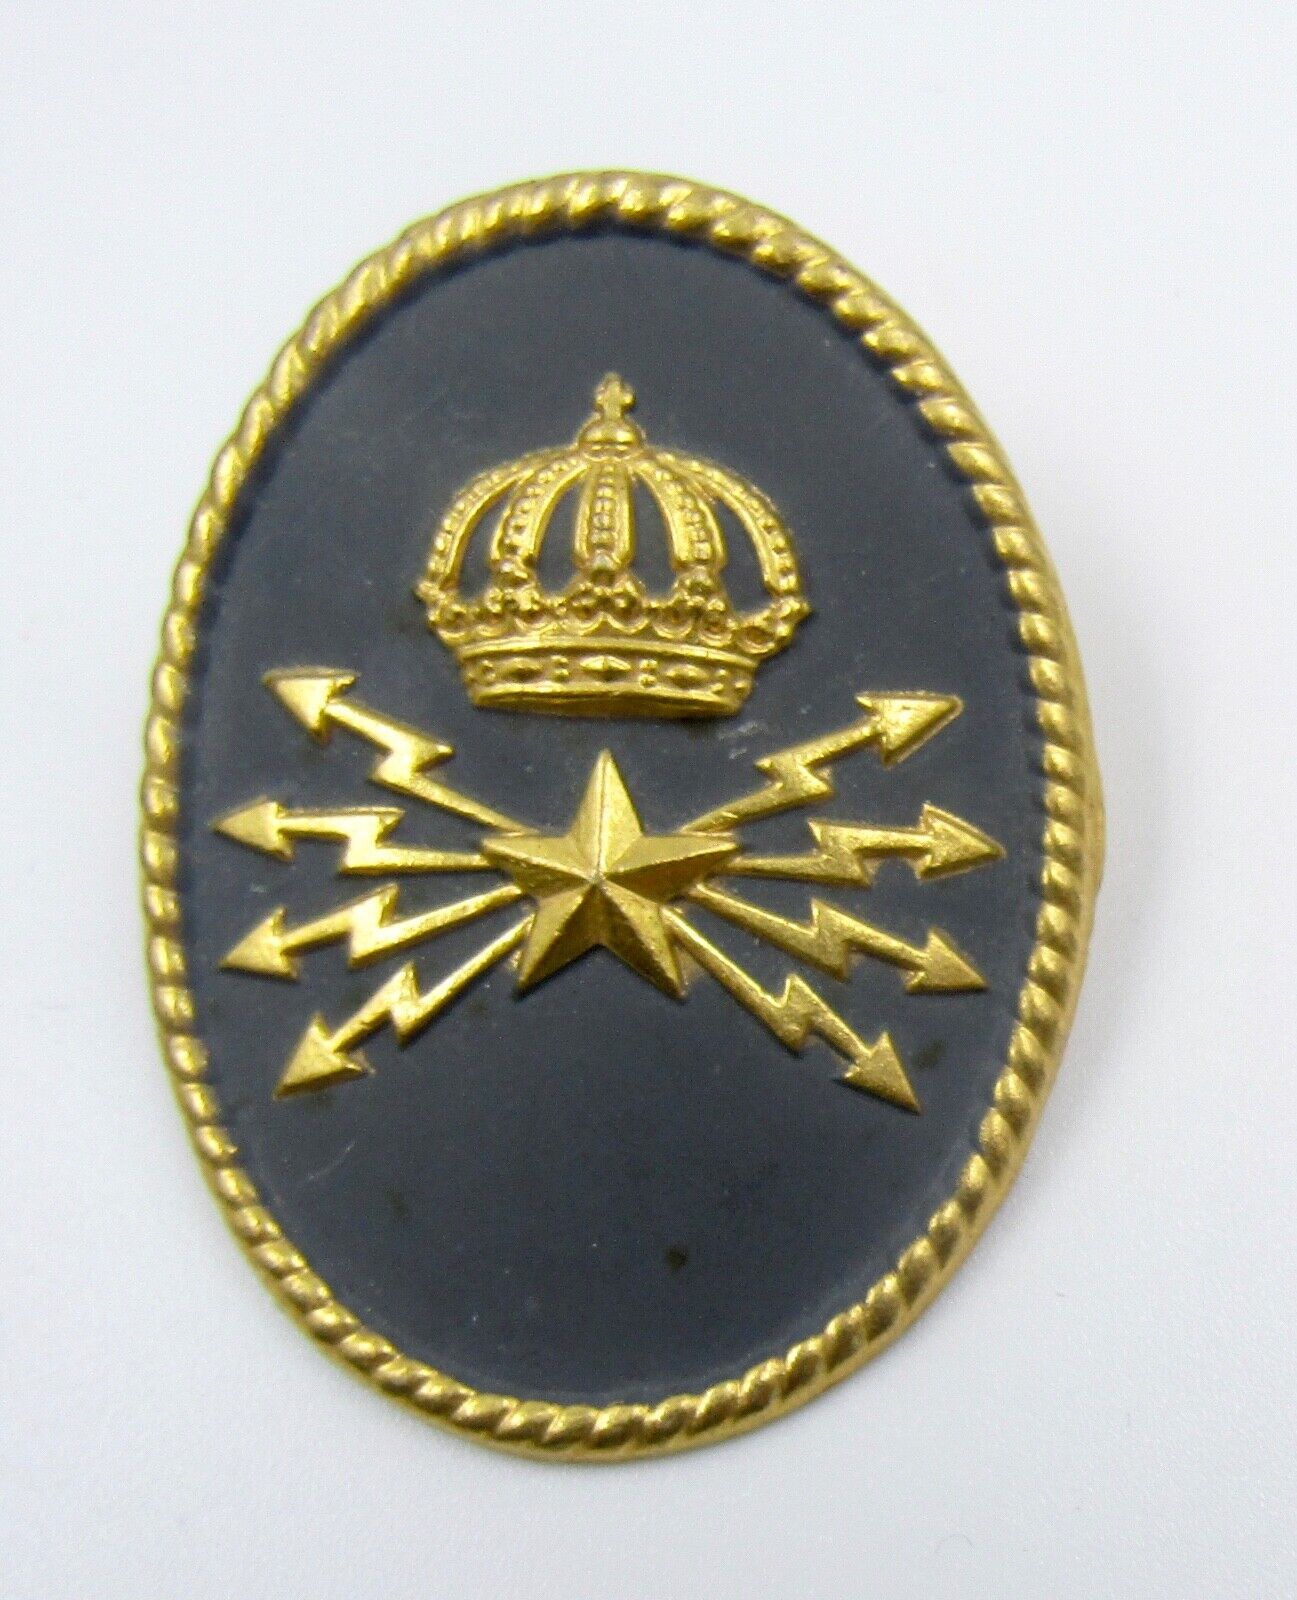 NICE VINTAGE SWEDEN ARMY - MILITARY INSIGNIA / BADGE - MADE BY SPORRONGS